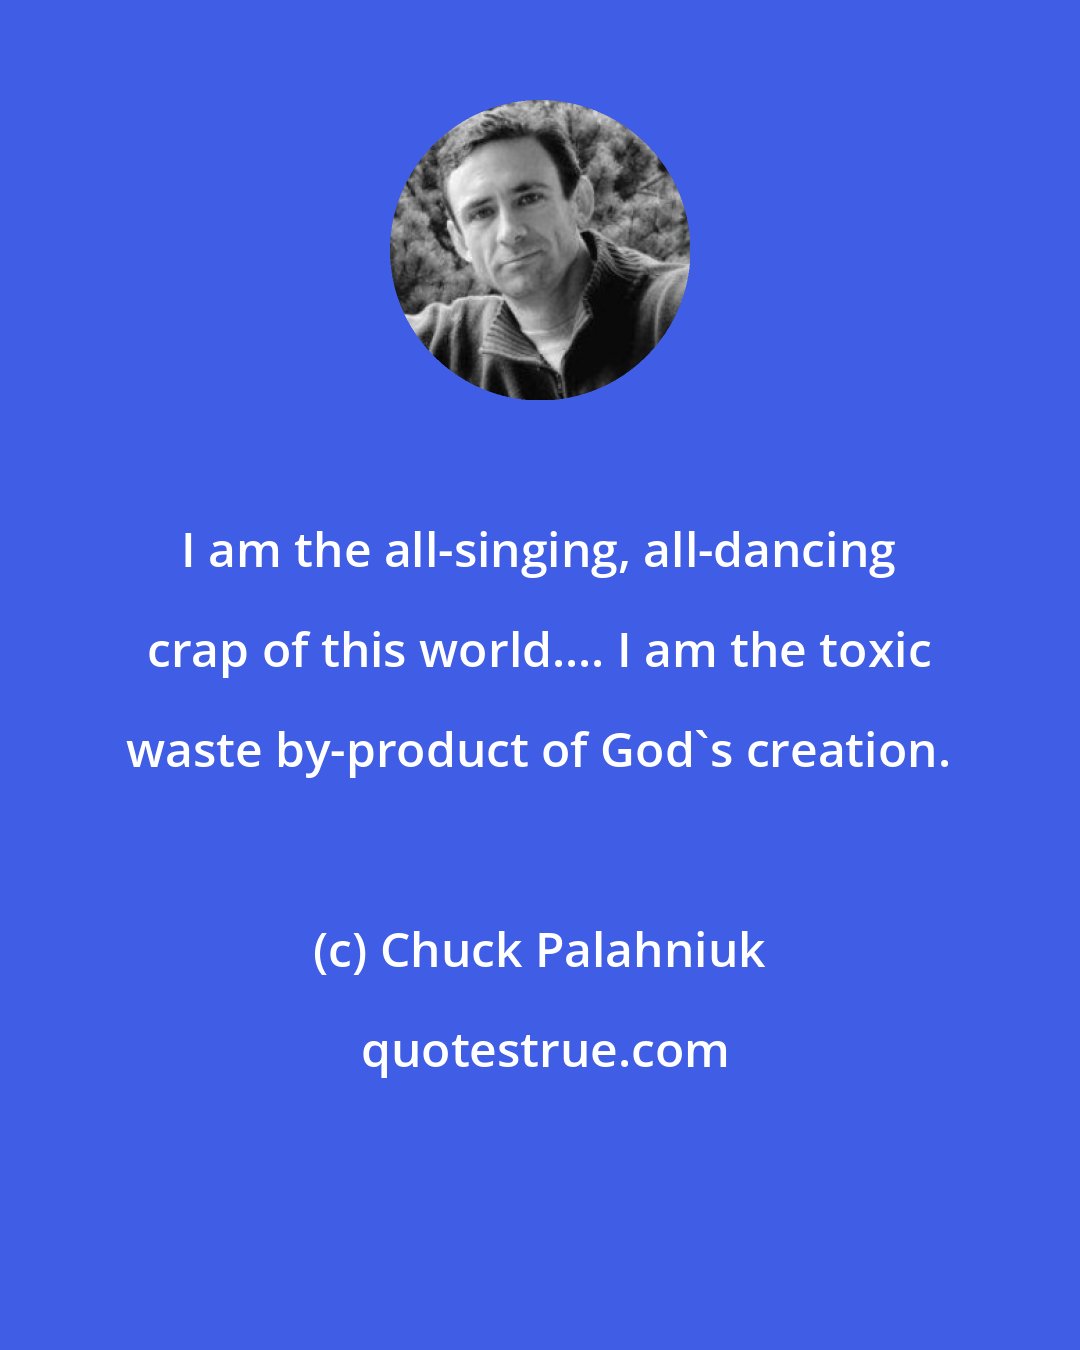 Chuck Palahniuk: I am the all-singing, all-dancing crap of this world.... I am the toxic waste by-product of God's creation.